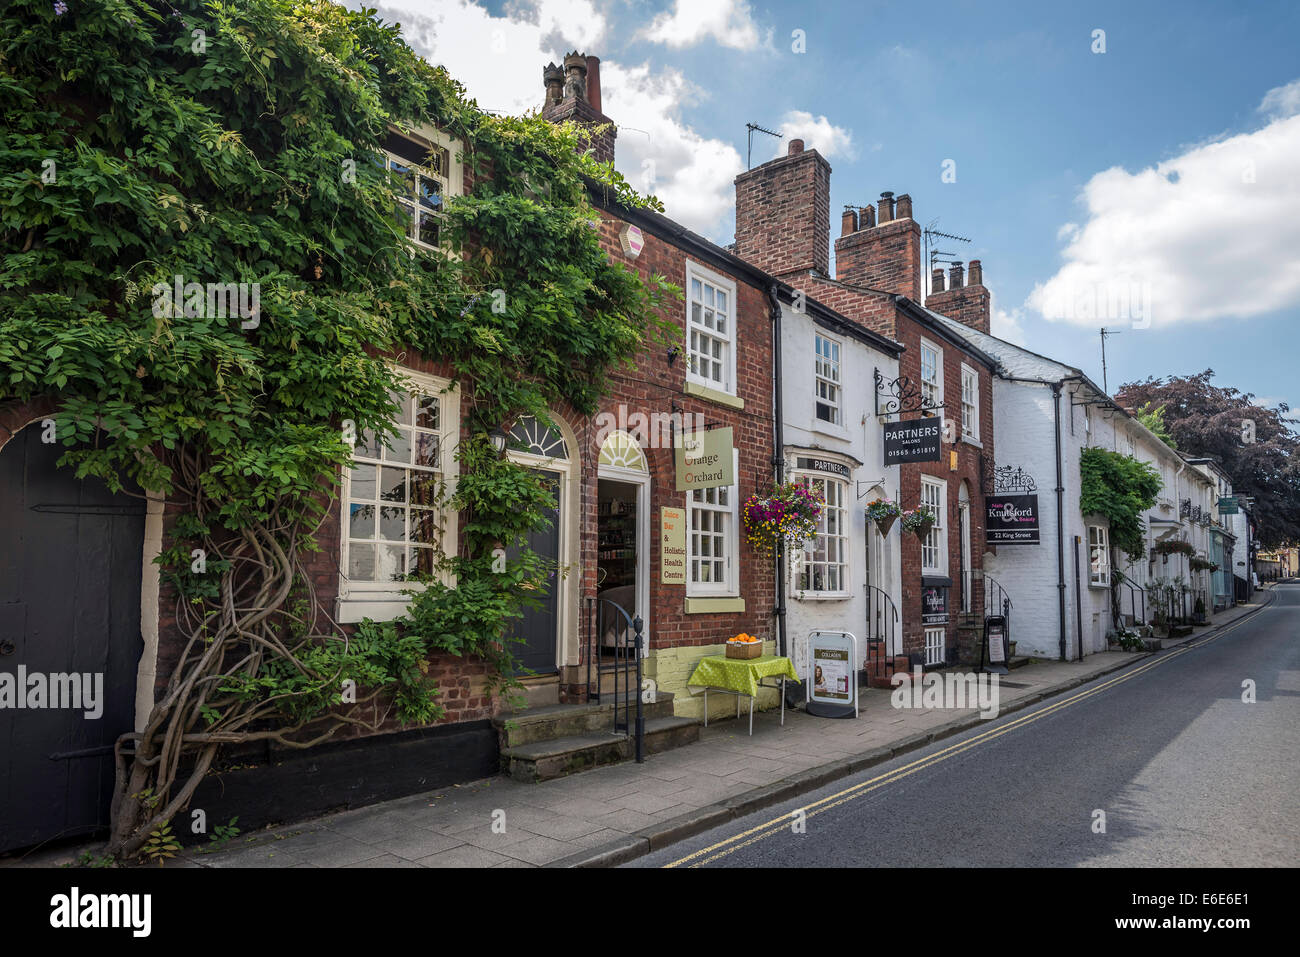 Knutsford Cheshire North West England. Constituency town of Chancellor of the Exchequer George Osborne M.P. King street. Stock Photo